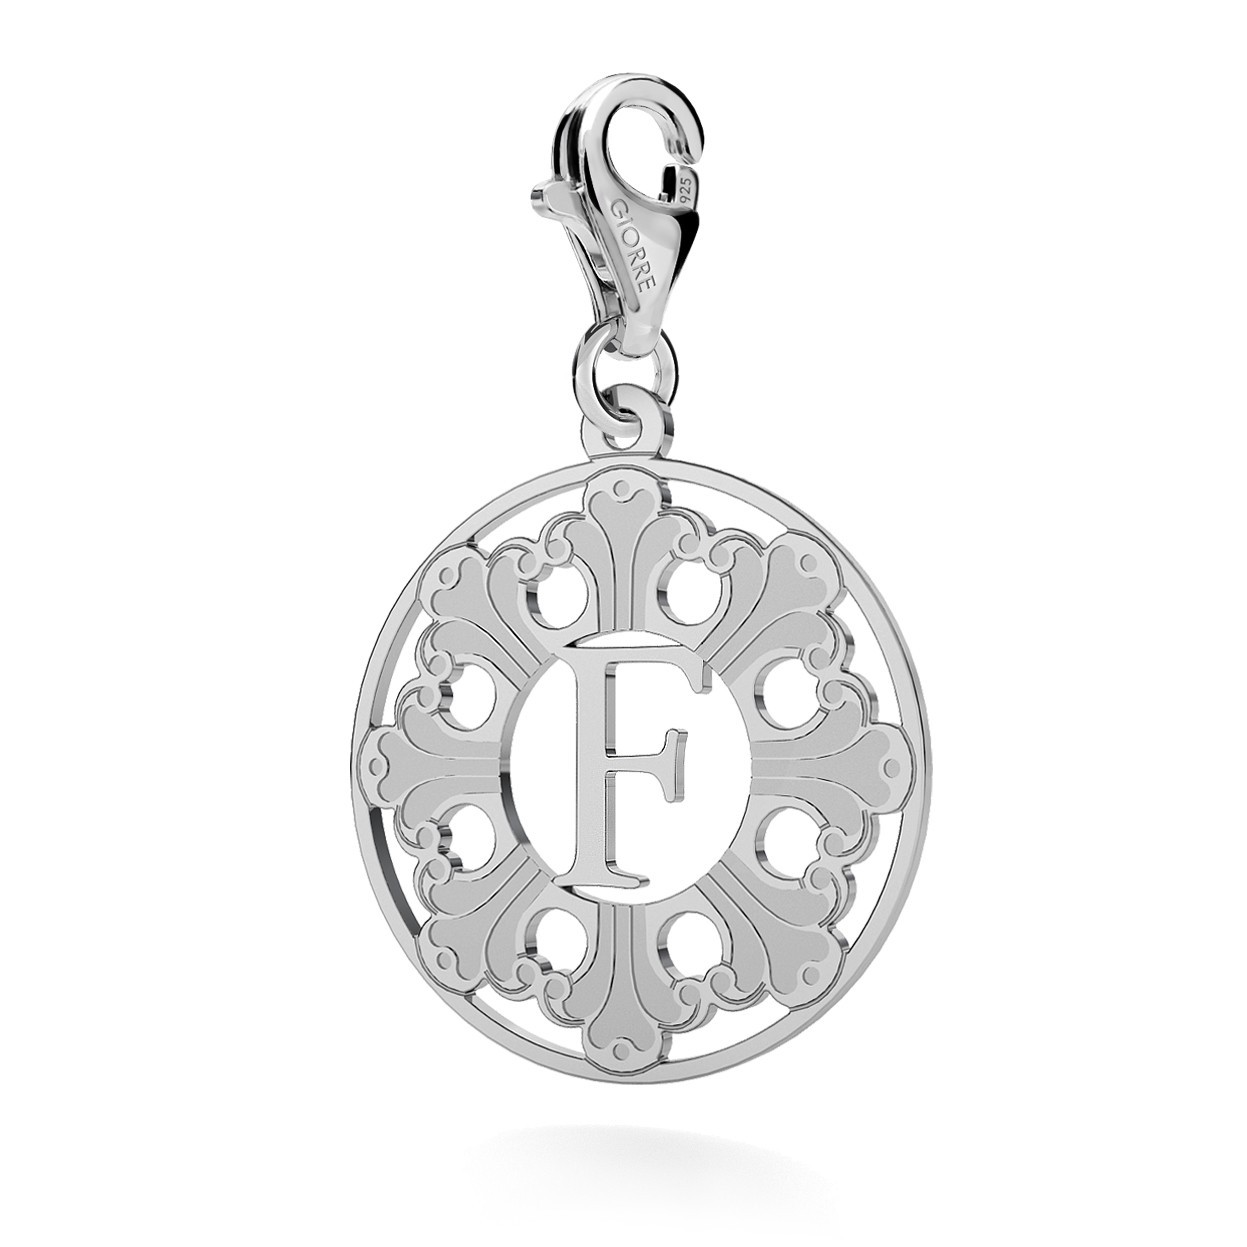 CHARM 146, GRENADE, STERLING SILVER (925) RHODIUM OR GOLD PLATED